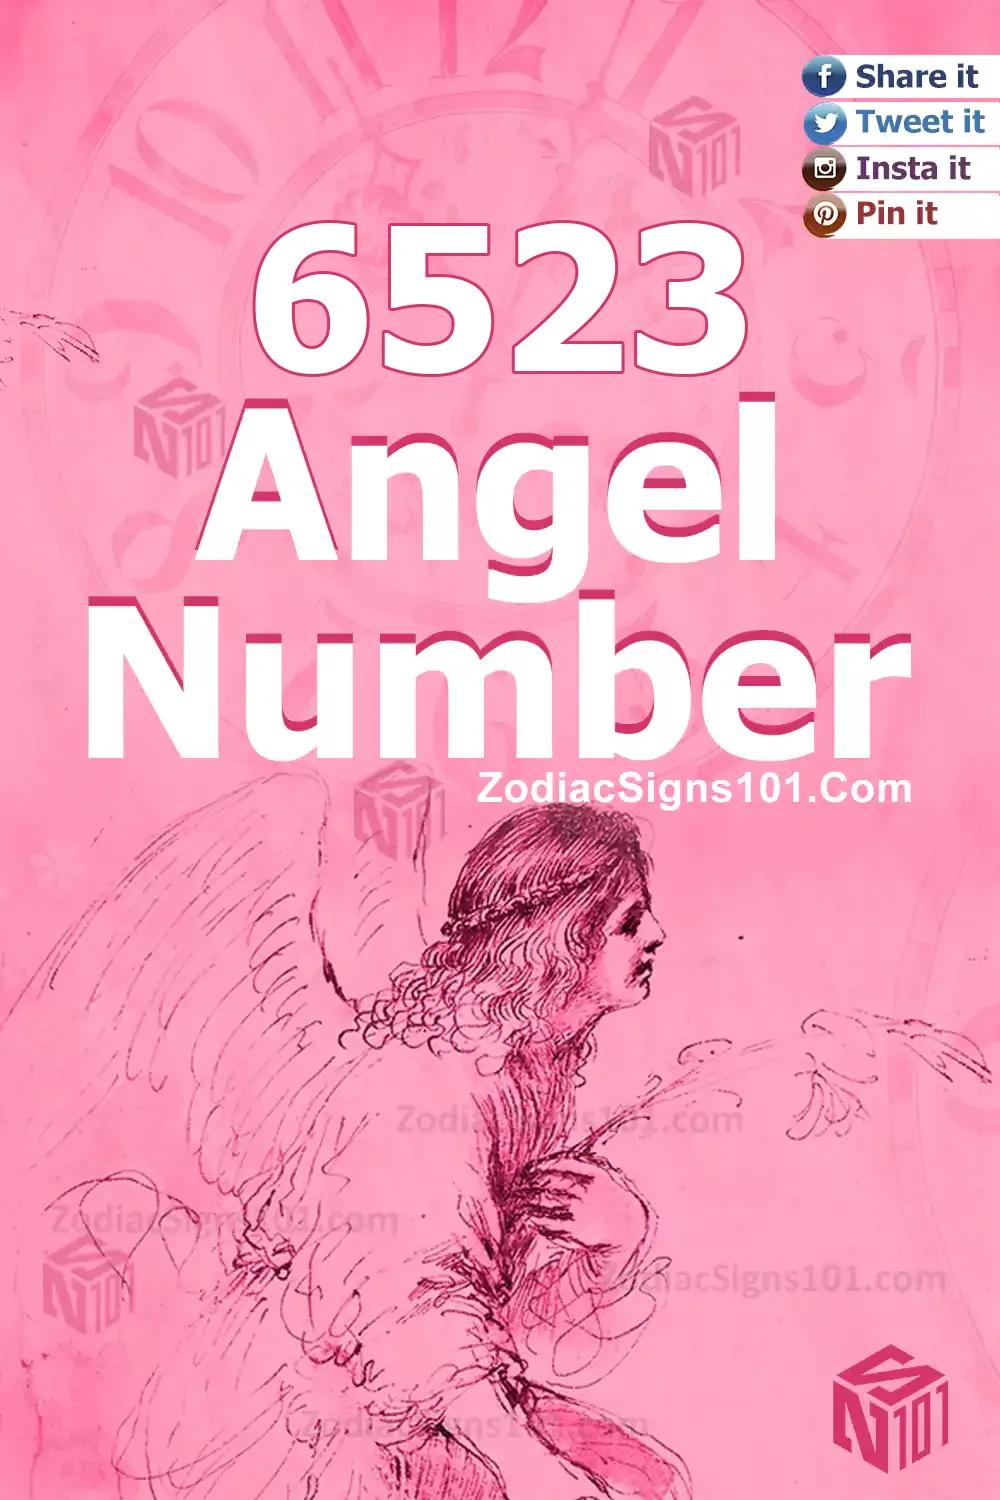 6523 Angel Number Meaning